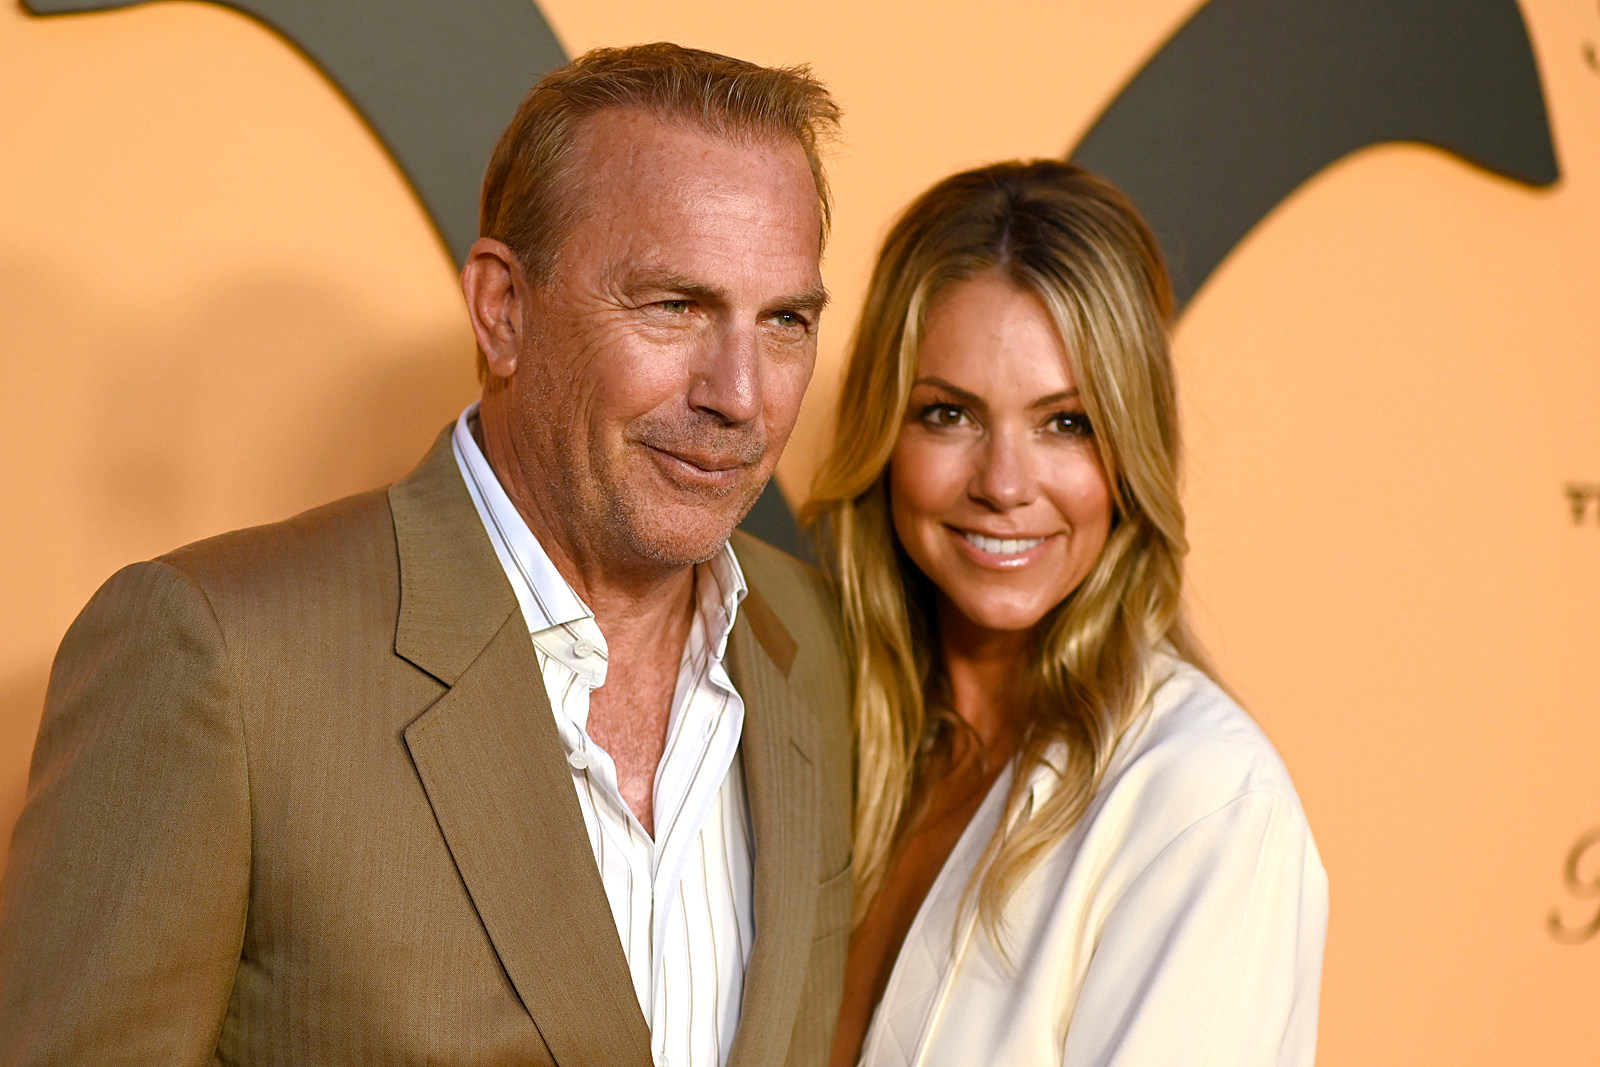 The Truth About The Crazy Rumor About Kevin Costner And This